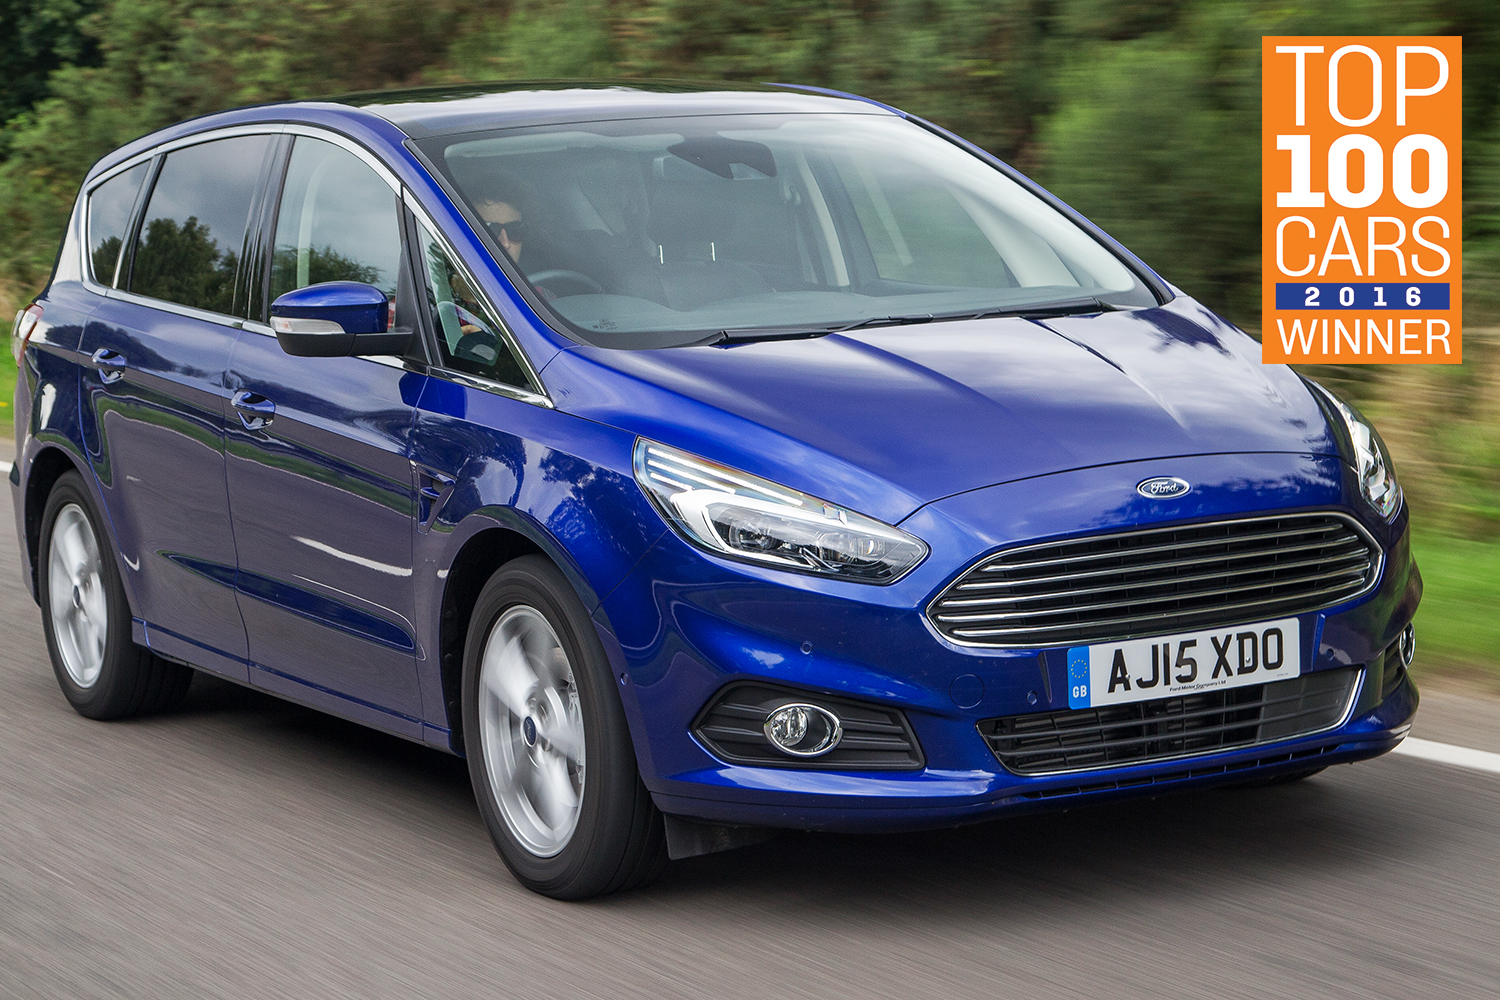 Ford S-Max is the winner of The Sunday Times Top 100 Cars - Top 5 Seven-seat MPVs